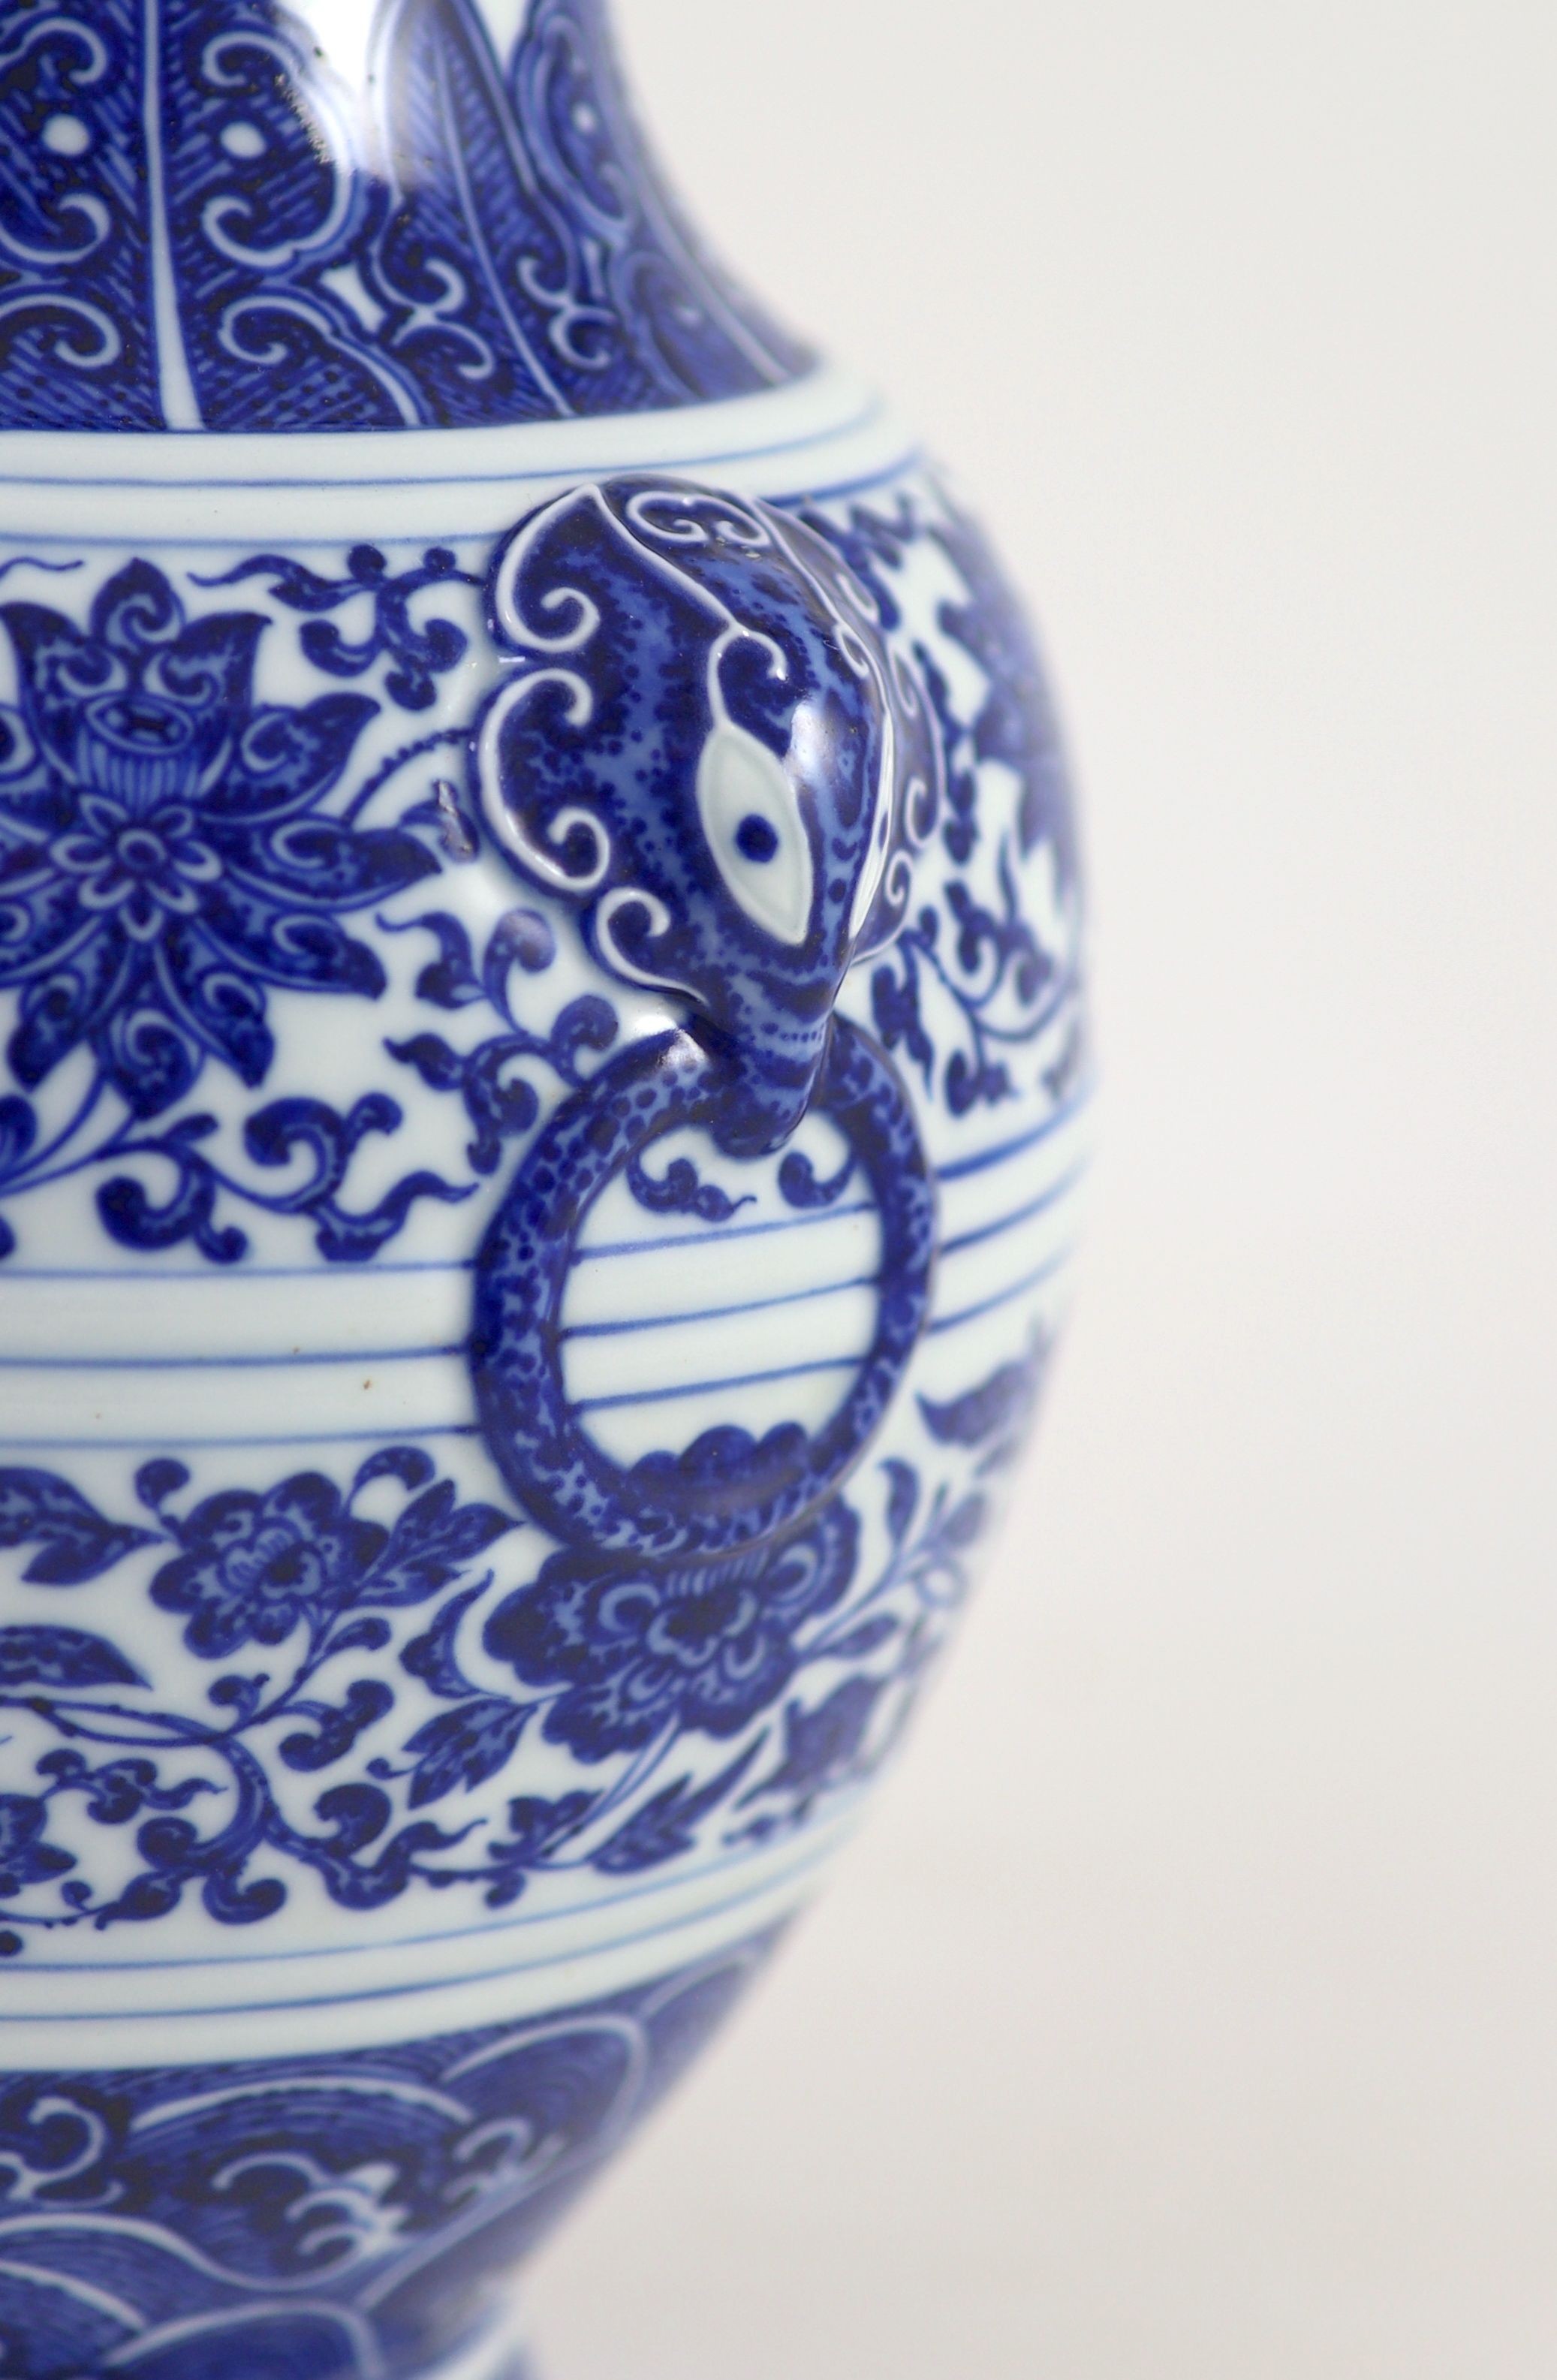 A Chinese archaistic blue and white vase, hu, Qianlong mark and possibly of the period, 25 cm high